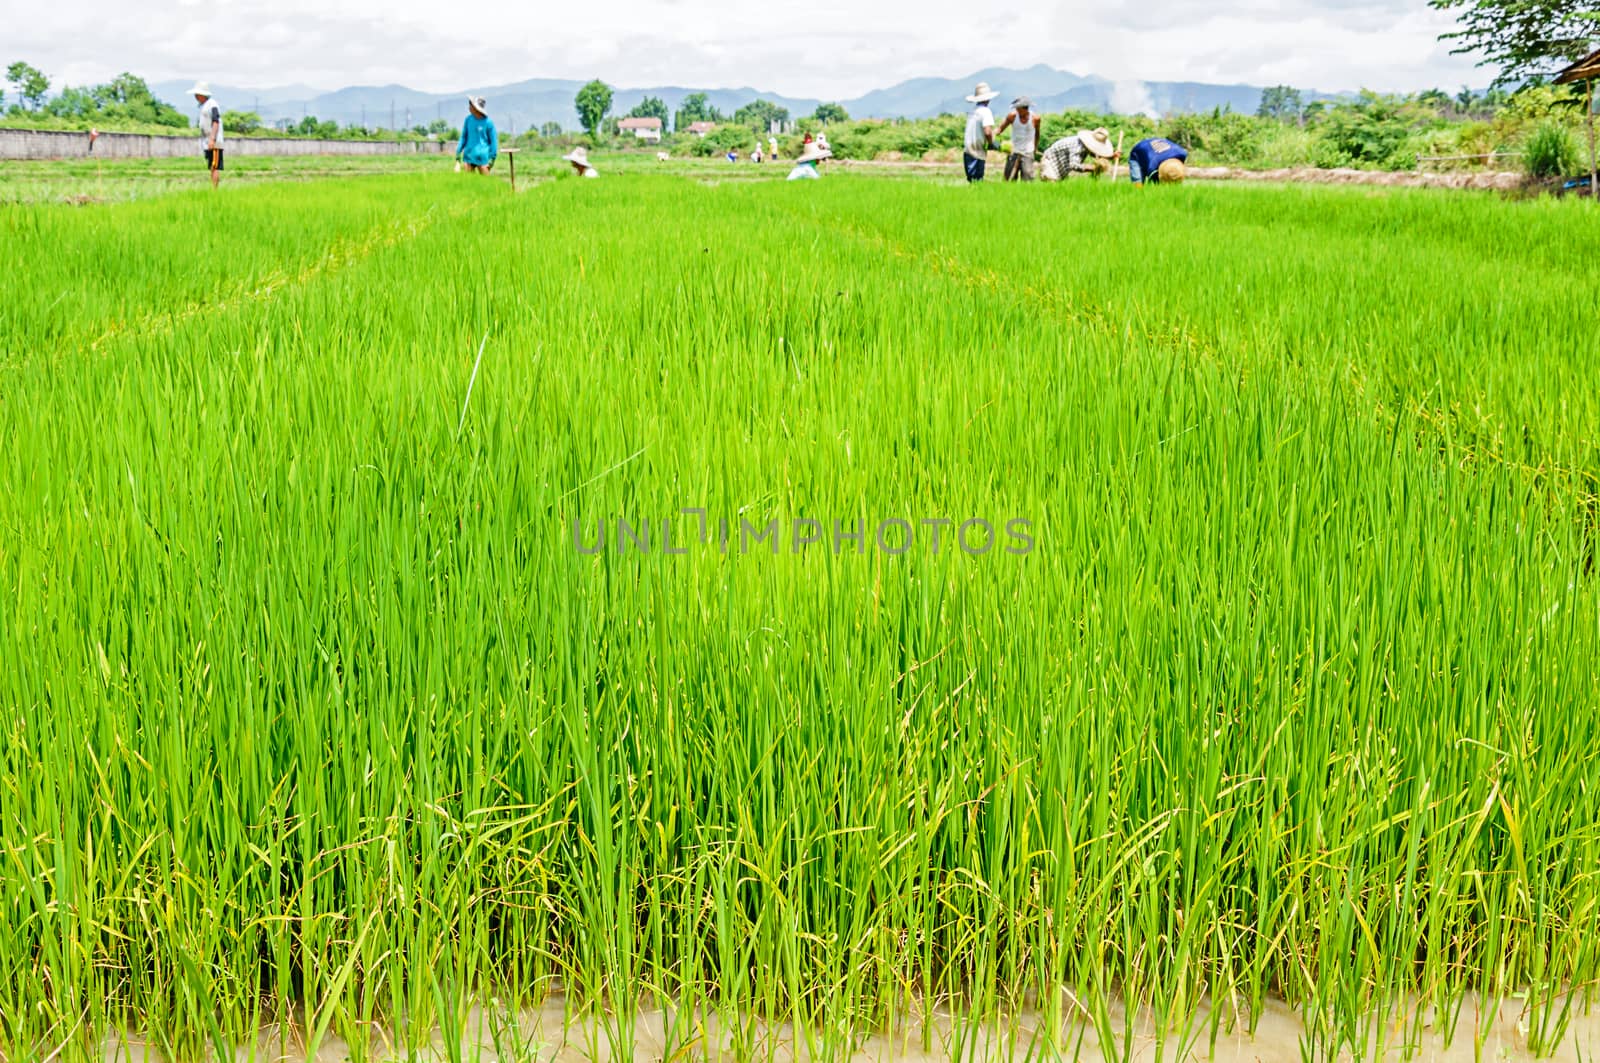 Farmers preparing rice seedlings for planting in northern part of Thailand